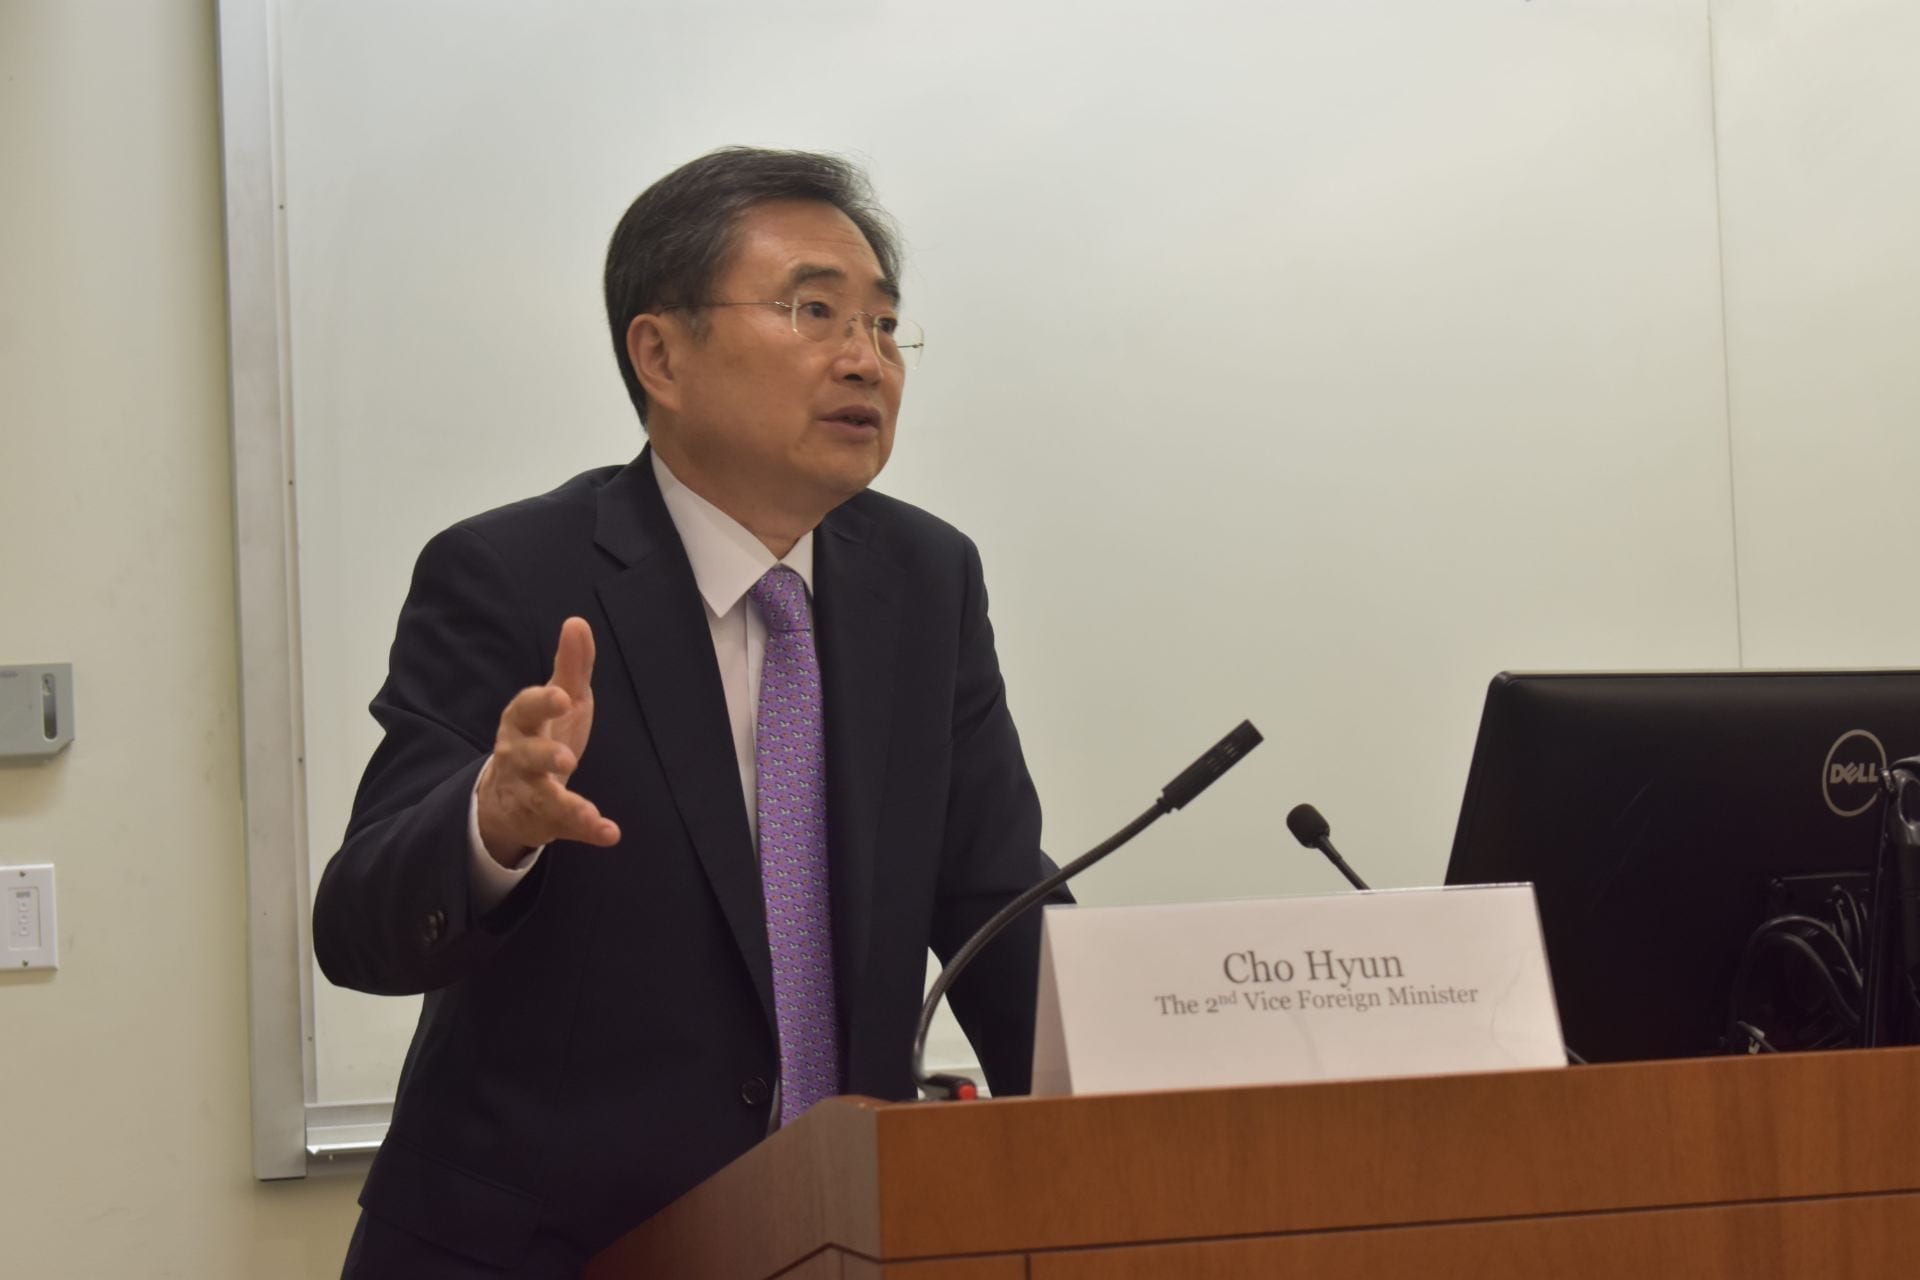 Cho Hyun speaking at the podium at an event